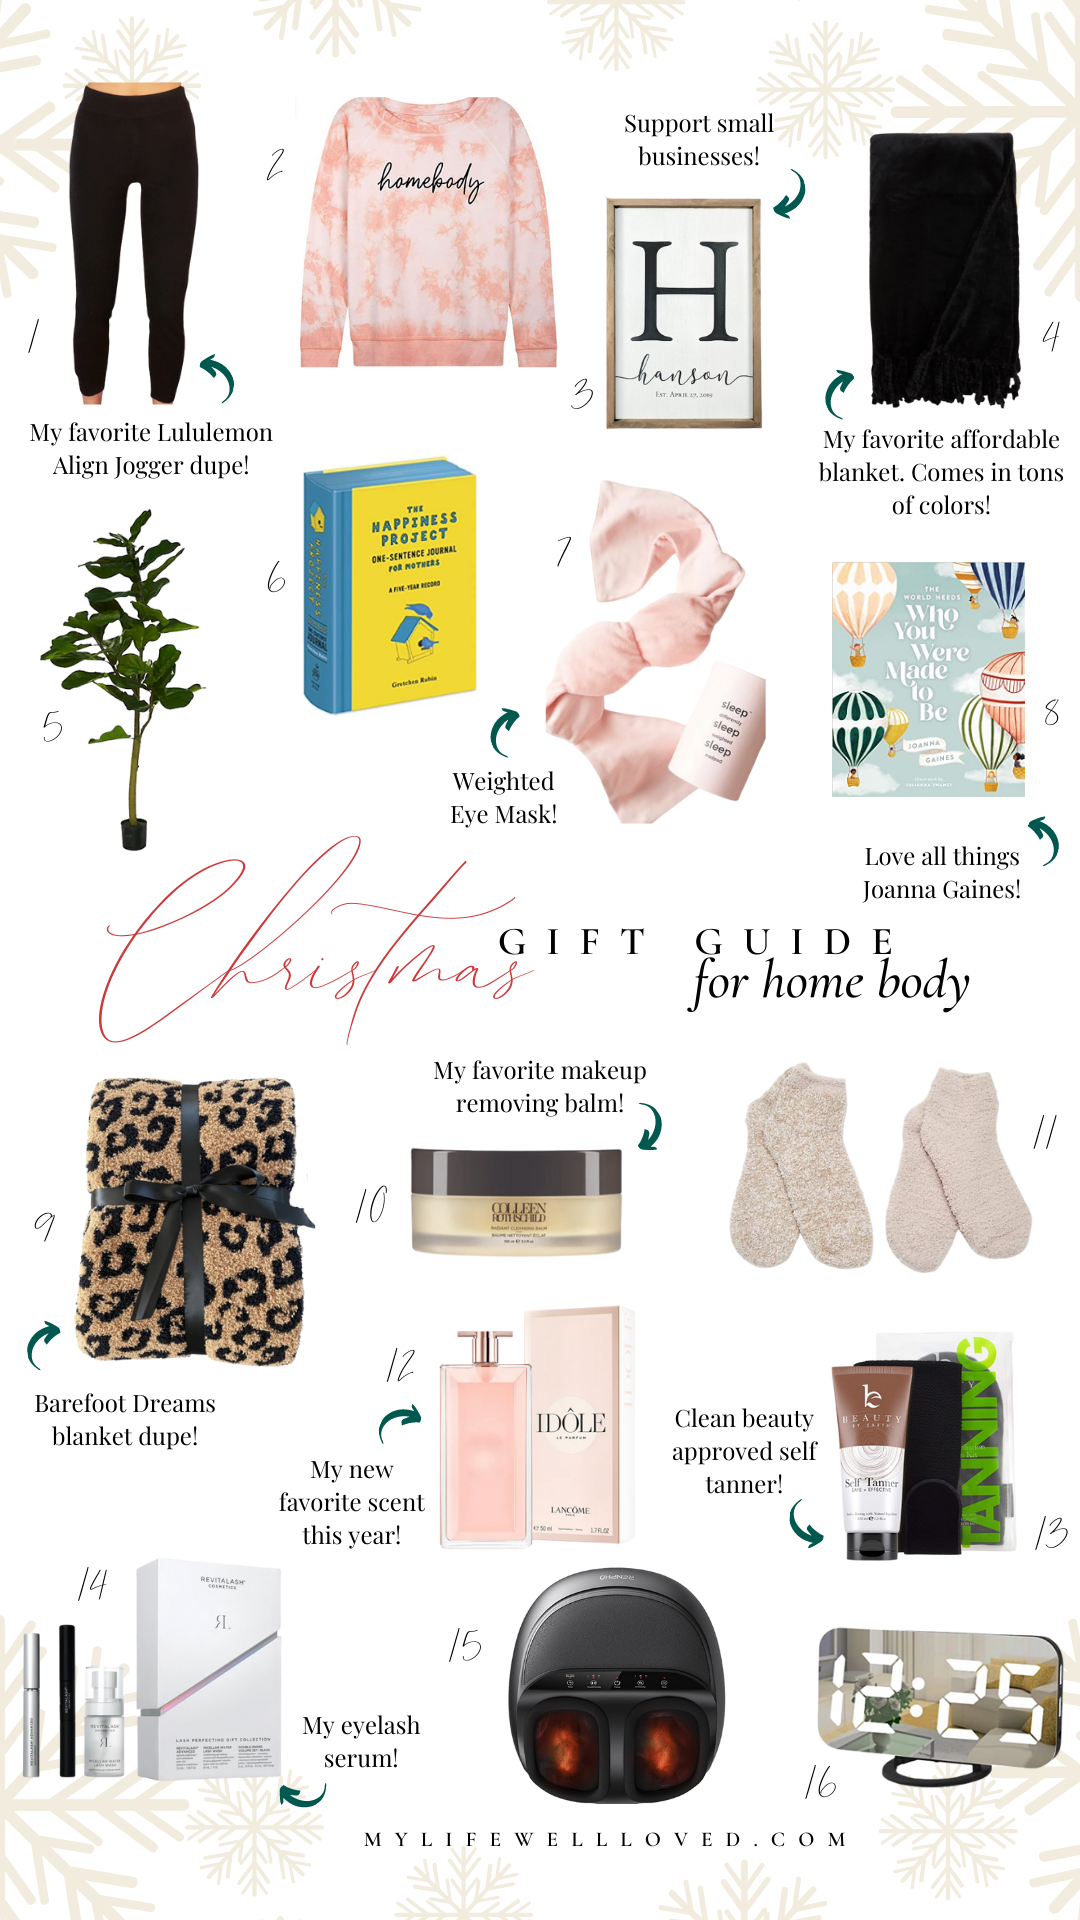 The Ultimate Introverted Homebody Gift Guide by Alabama lifestyle + fashion blogger, Heather Brown // My Life Well Loved